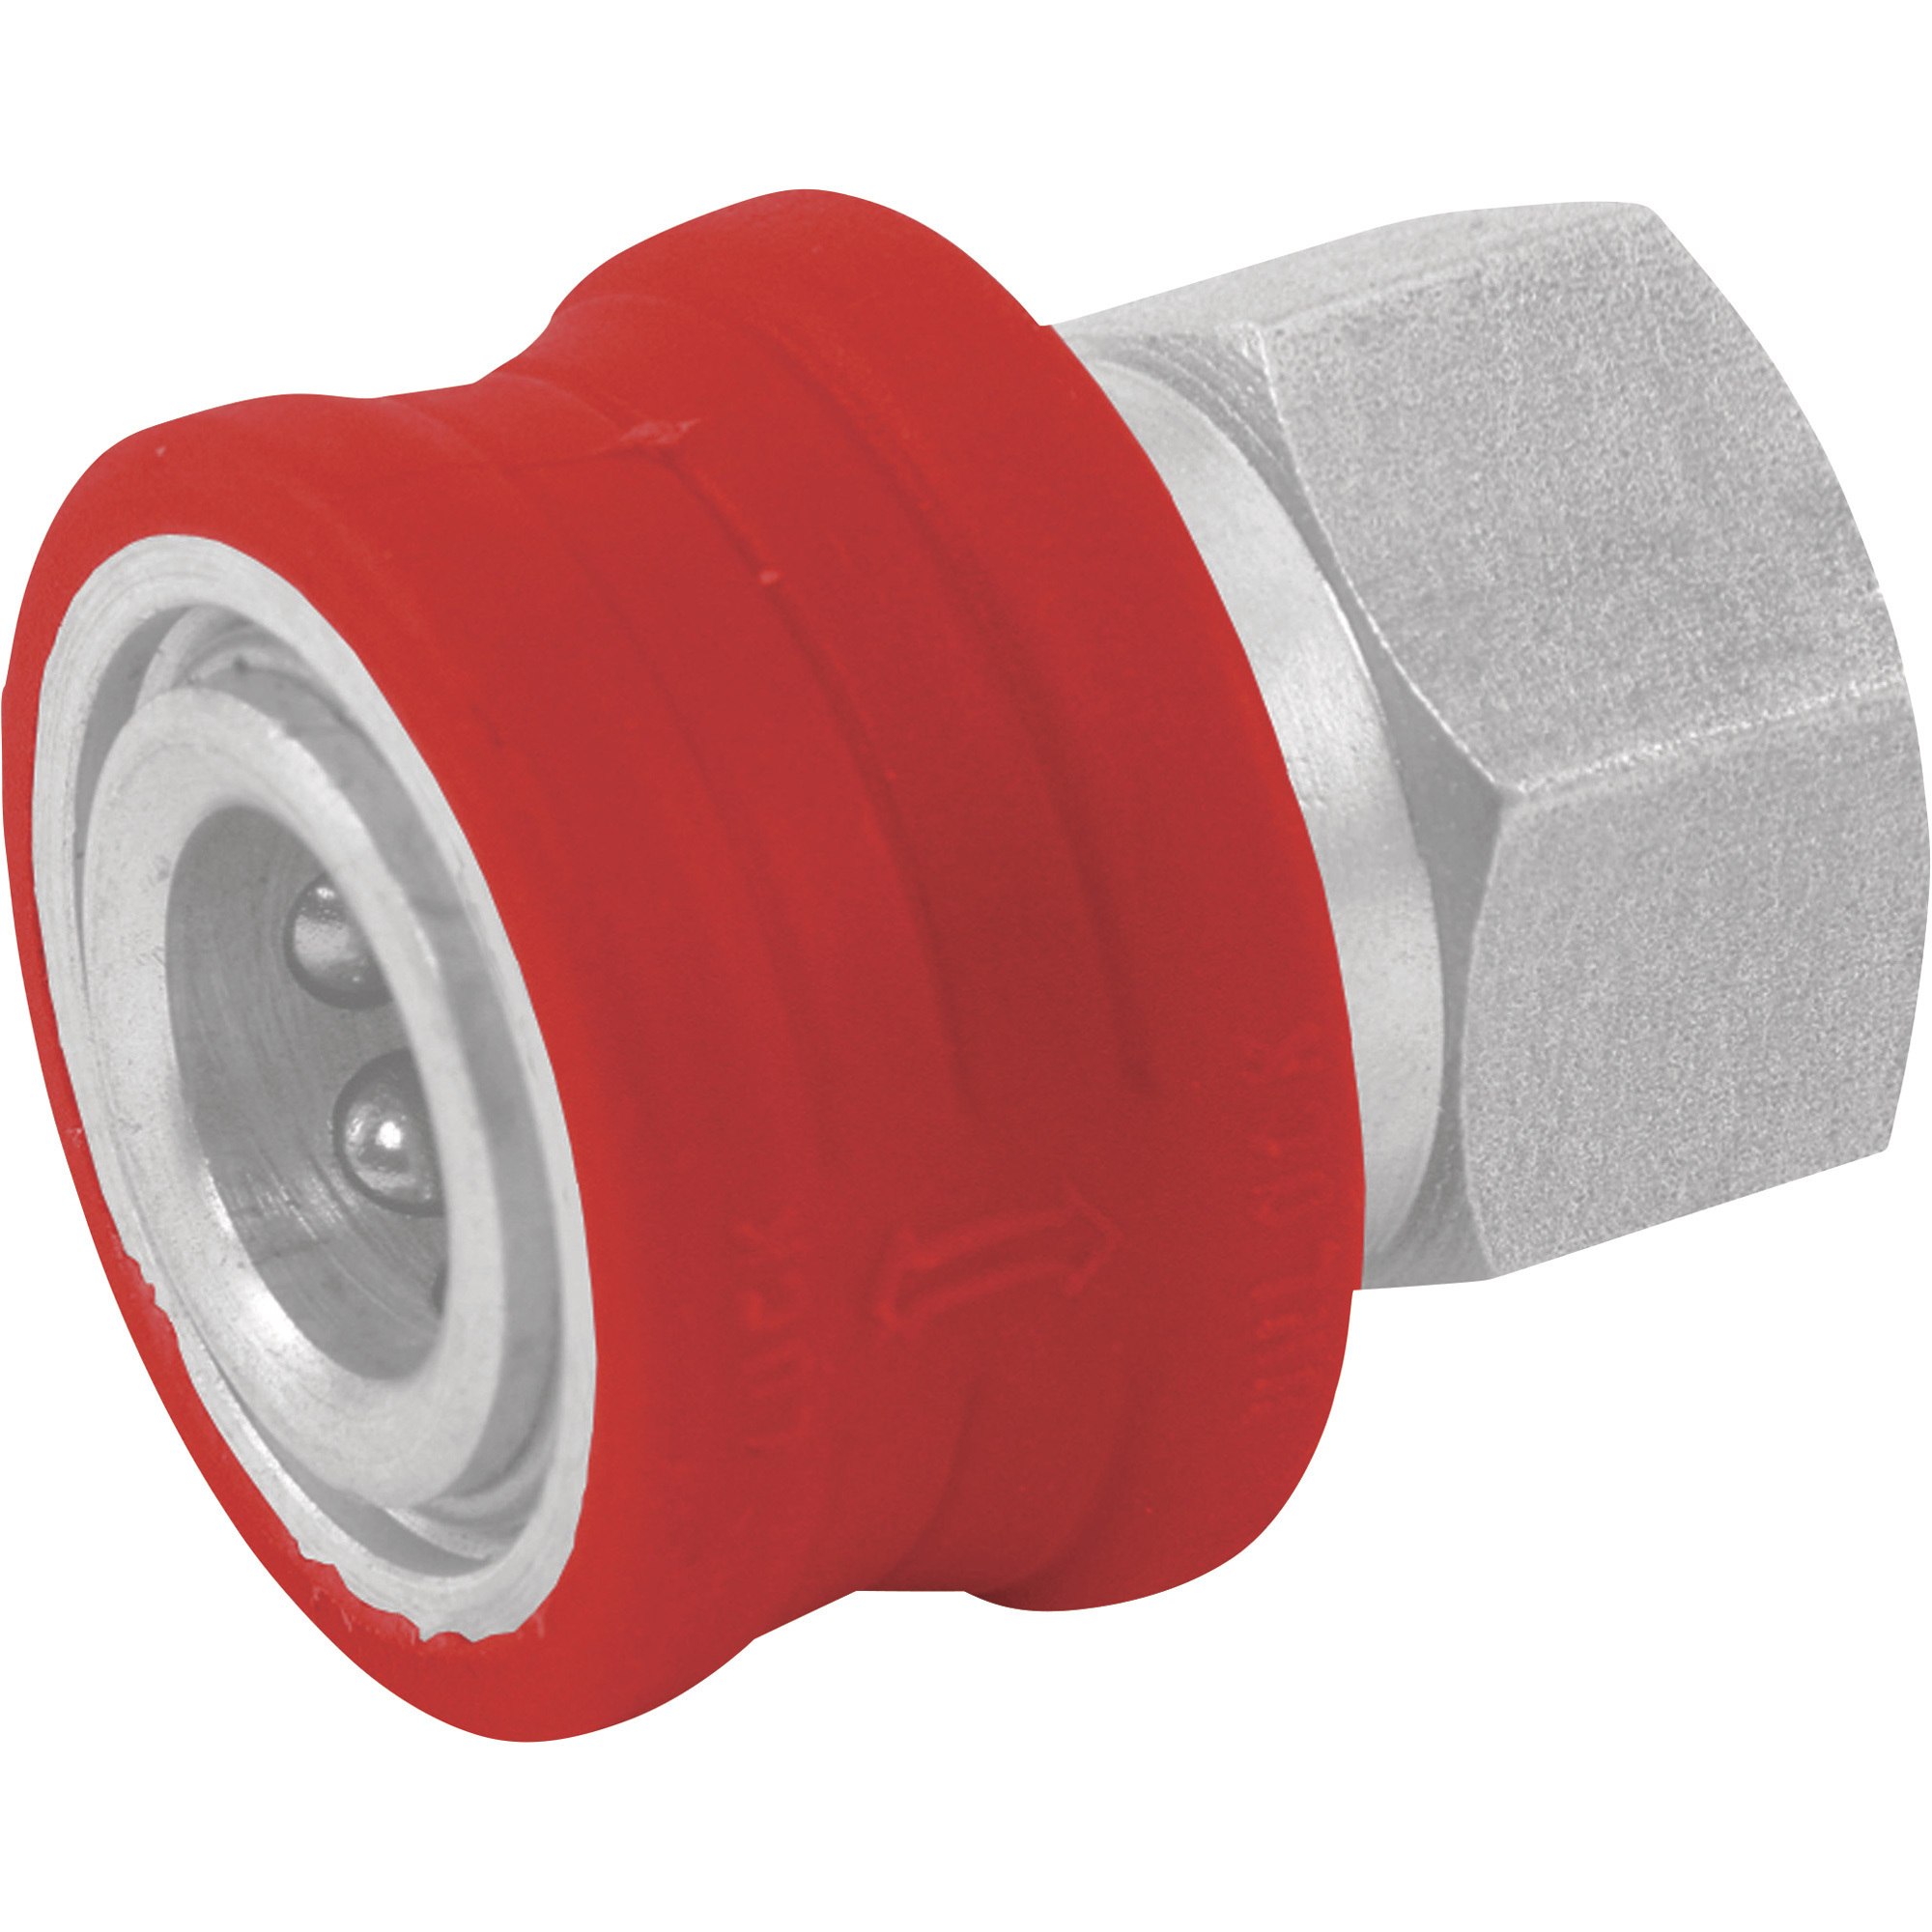 NorthStar Pressure Washer Insulated Quick-Connect Coupler â 1/4Inch NPT-F, 5000 PSI, 12.0 GPM, Stainless Steel, Model 2100385P